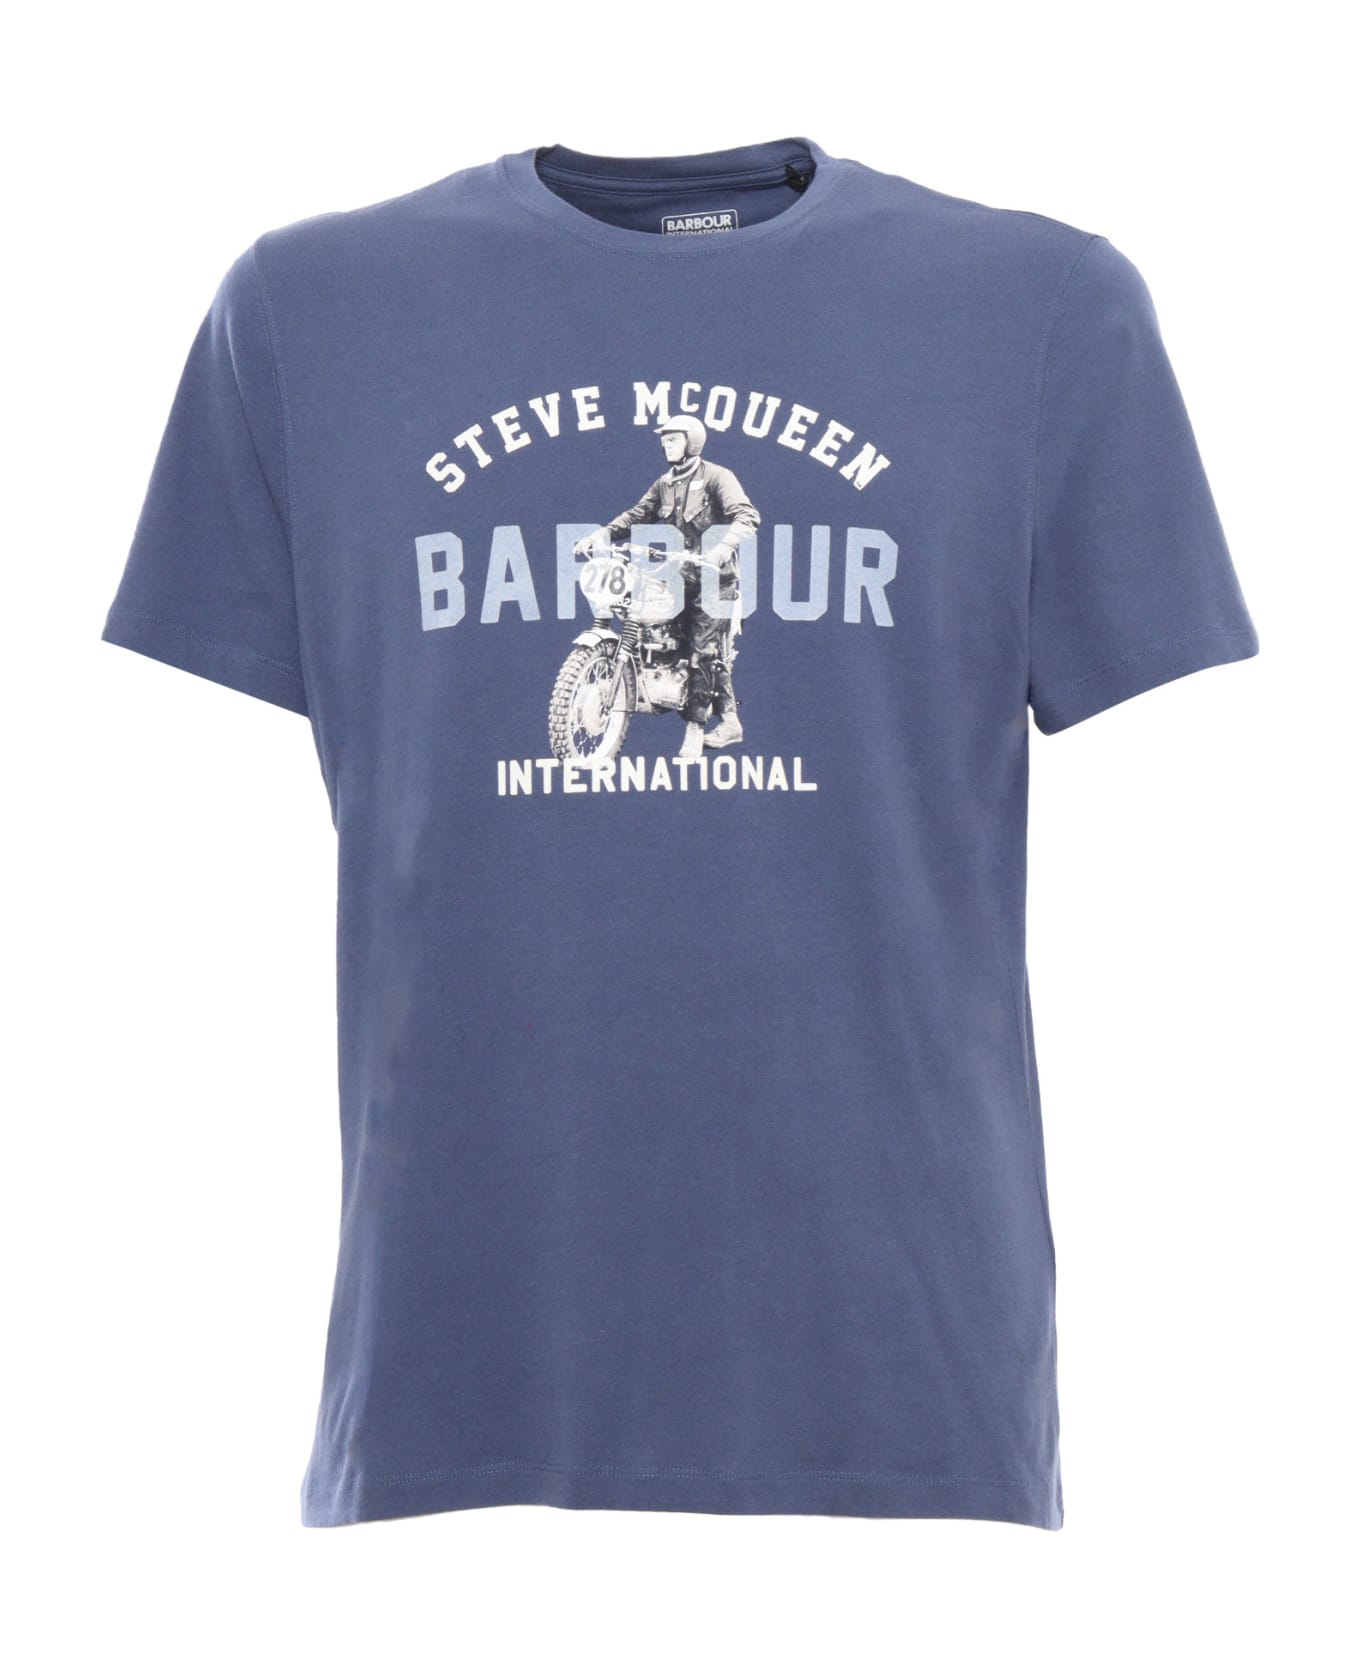 Barbour Blue Printed T-shirt - BLUE シャツ